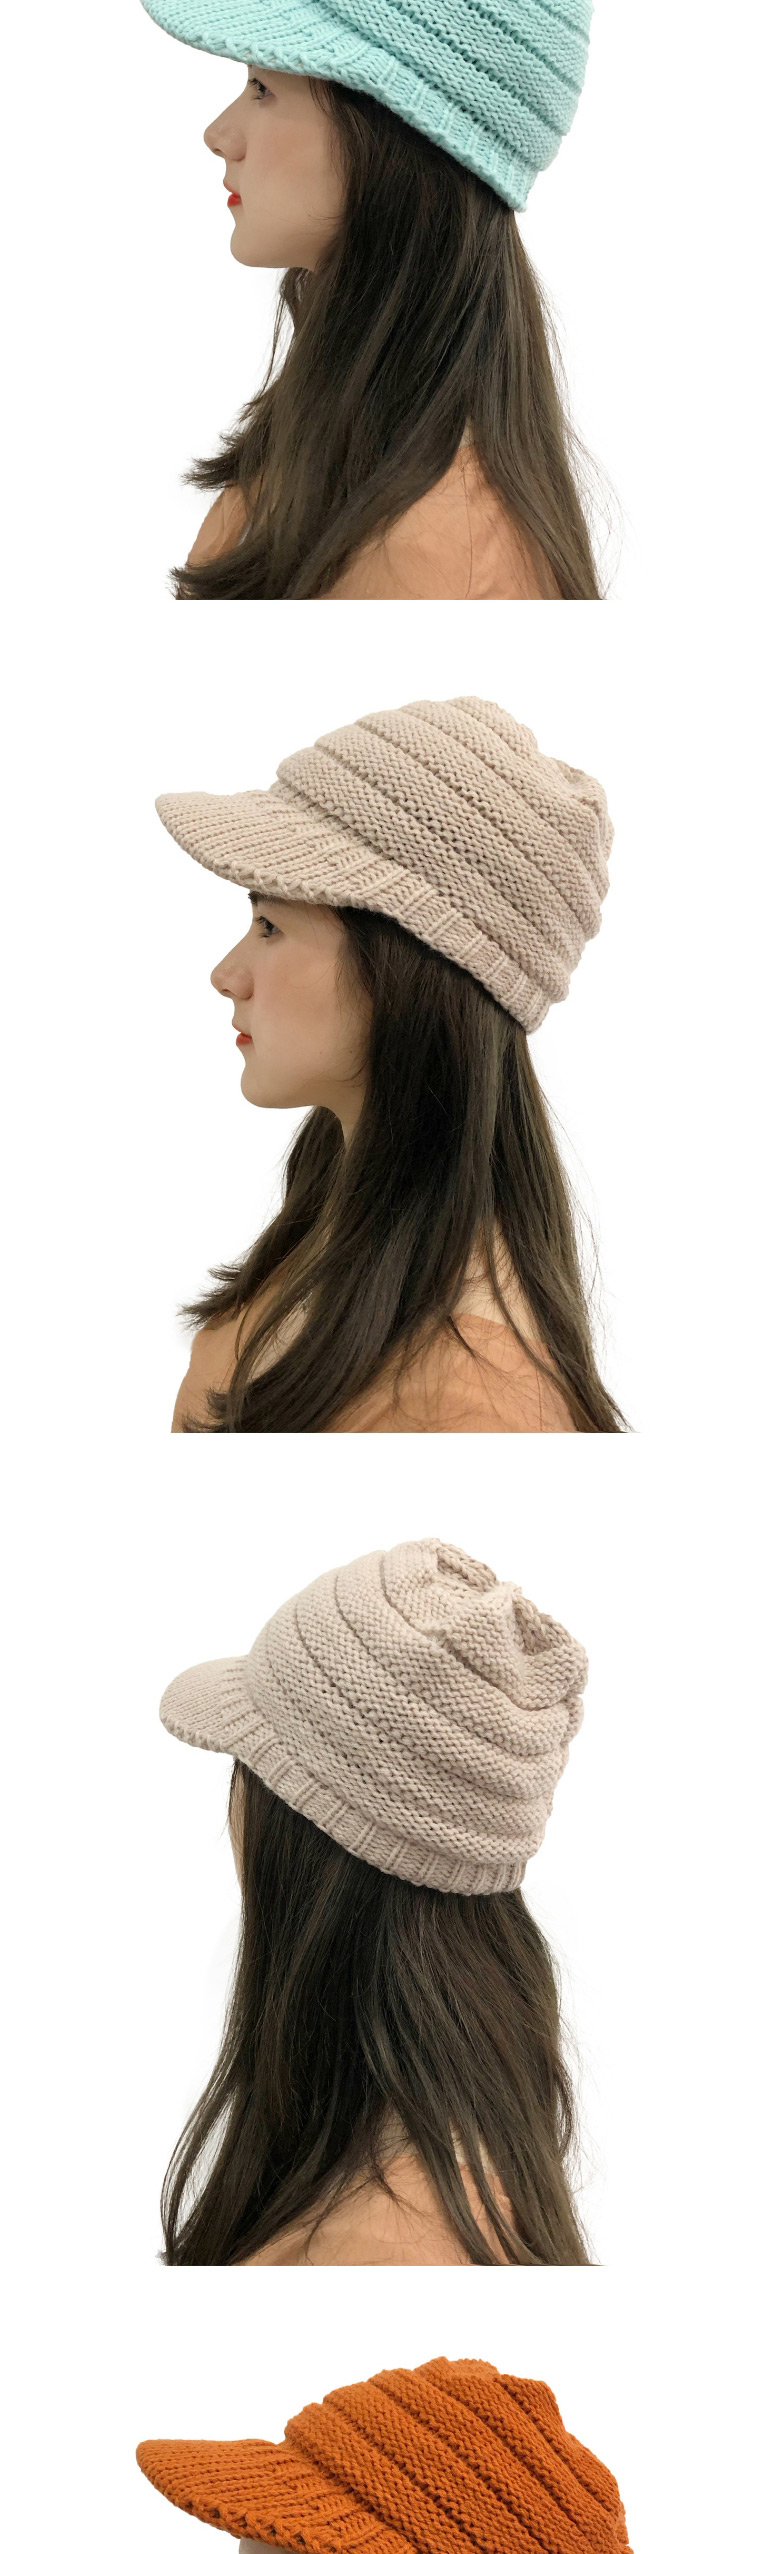 Fashion White Solid Color Wool Beret With Brim,Beanies&Others